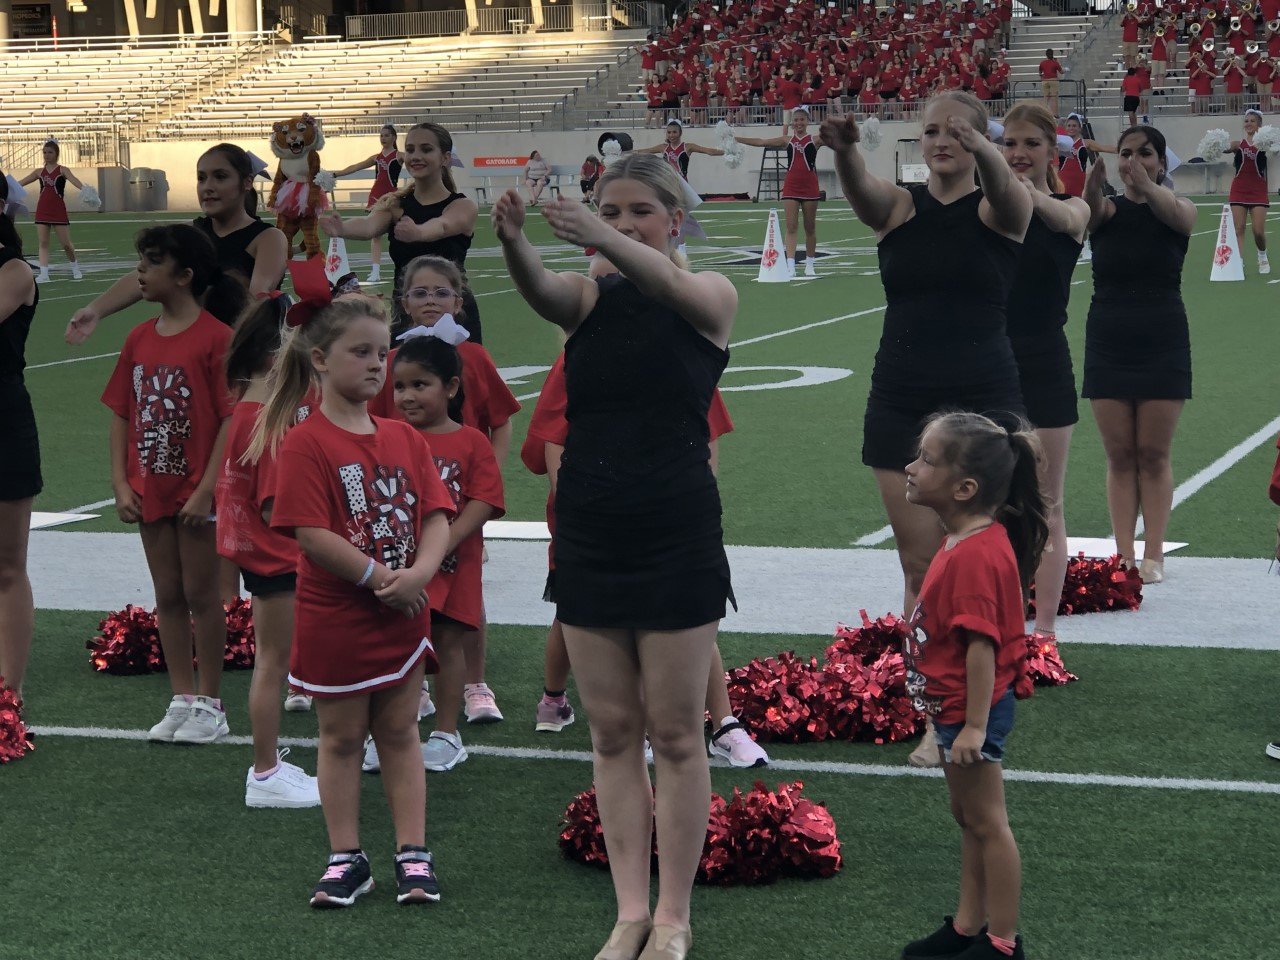 Katy Bengal Brigade vice president Madeline Ritz performs while two future Brigade members look on.